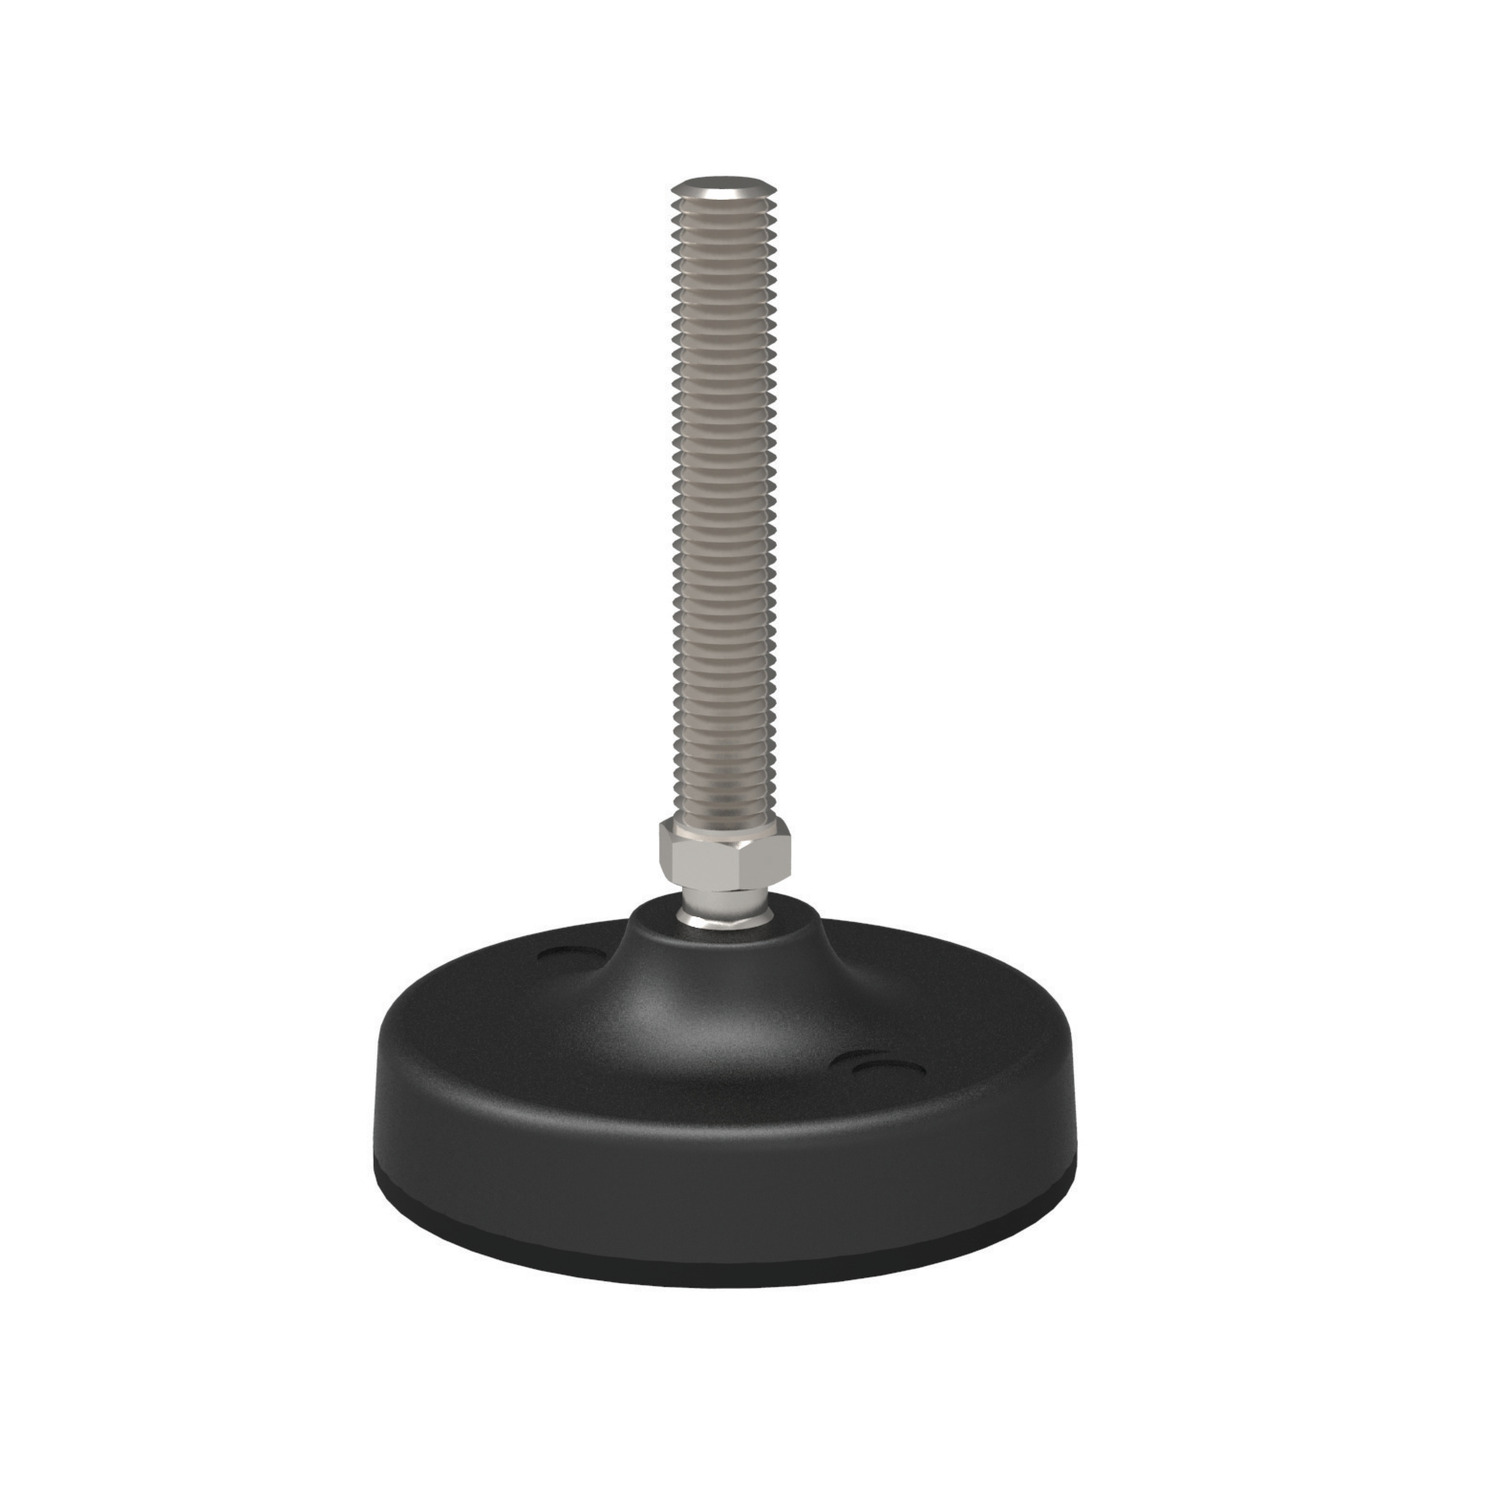 Product P2203.2, Levelling Feet bolt down option, bolt stainless steel / 